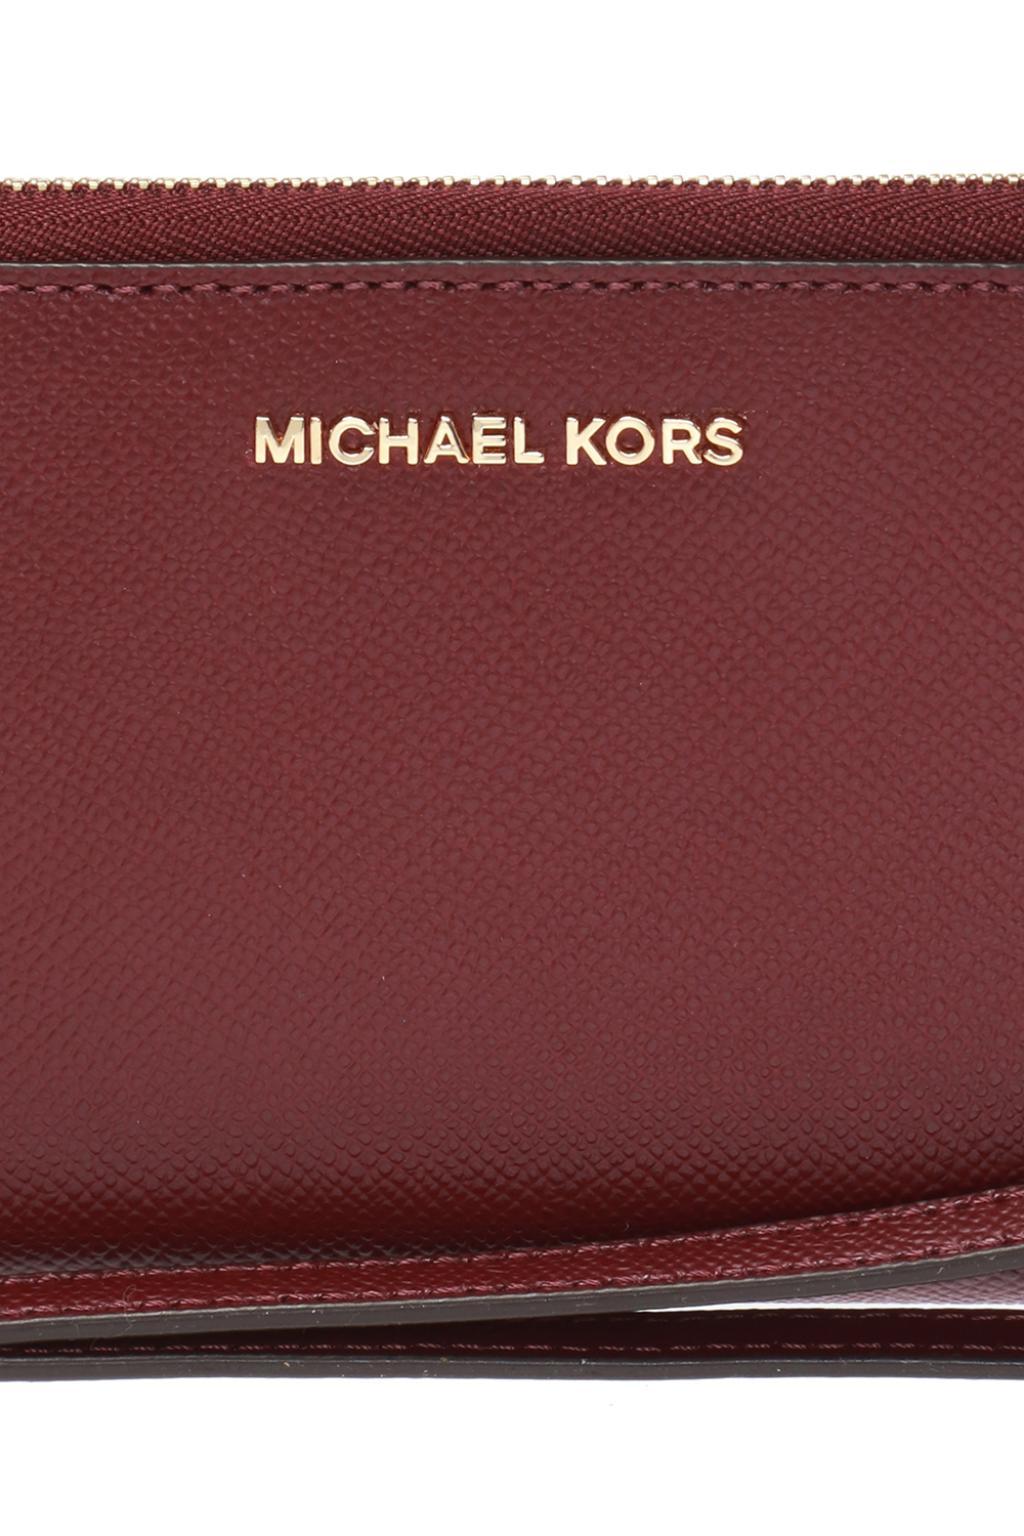 Michael Kors, Bags, Michael Kors Red Wallet With Wrist Strap